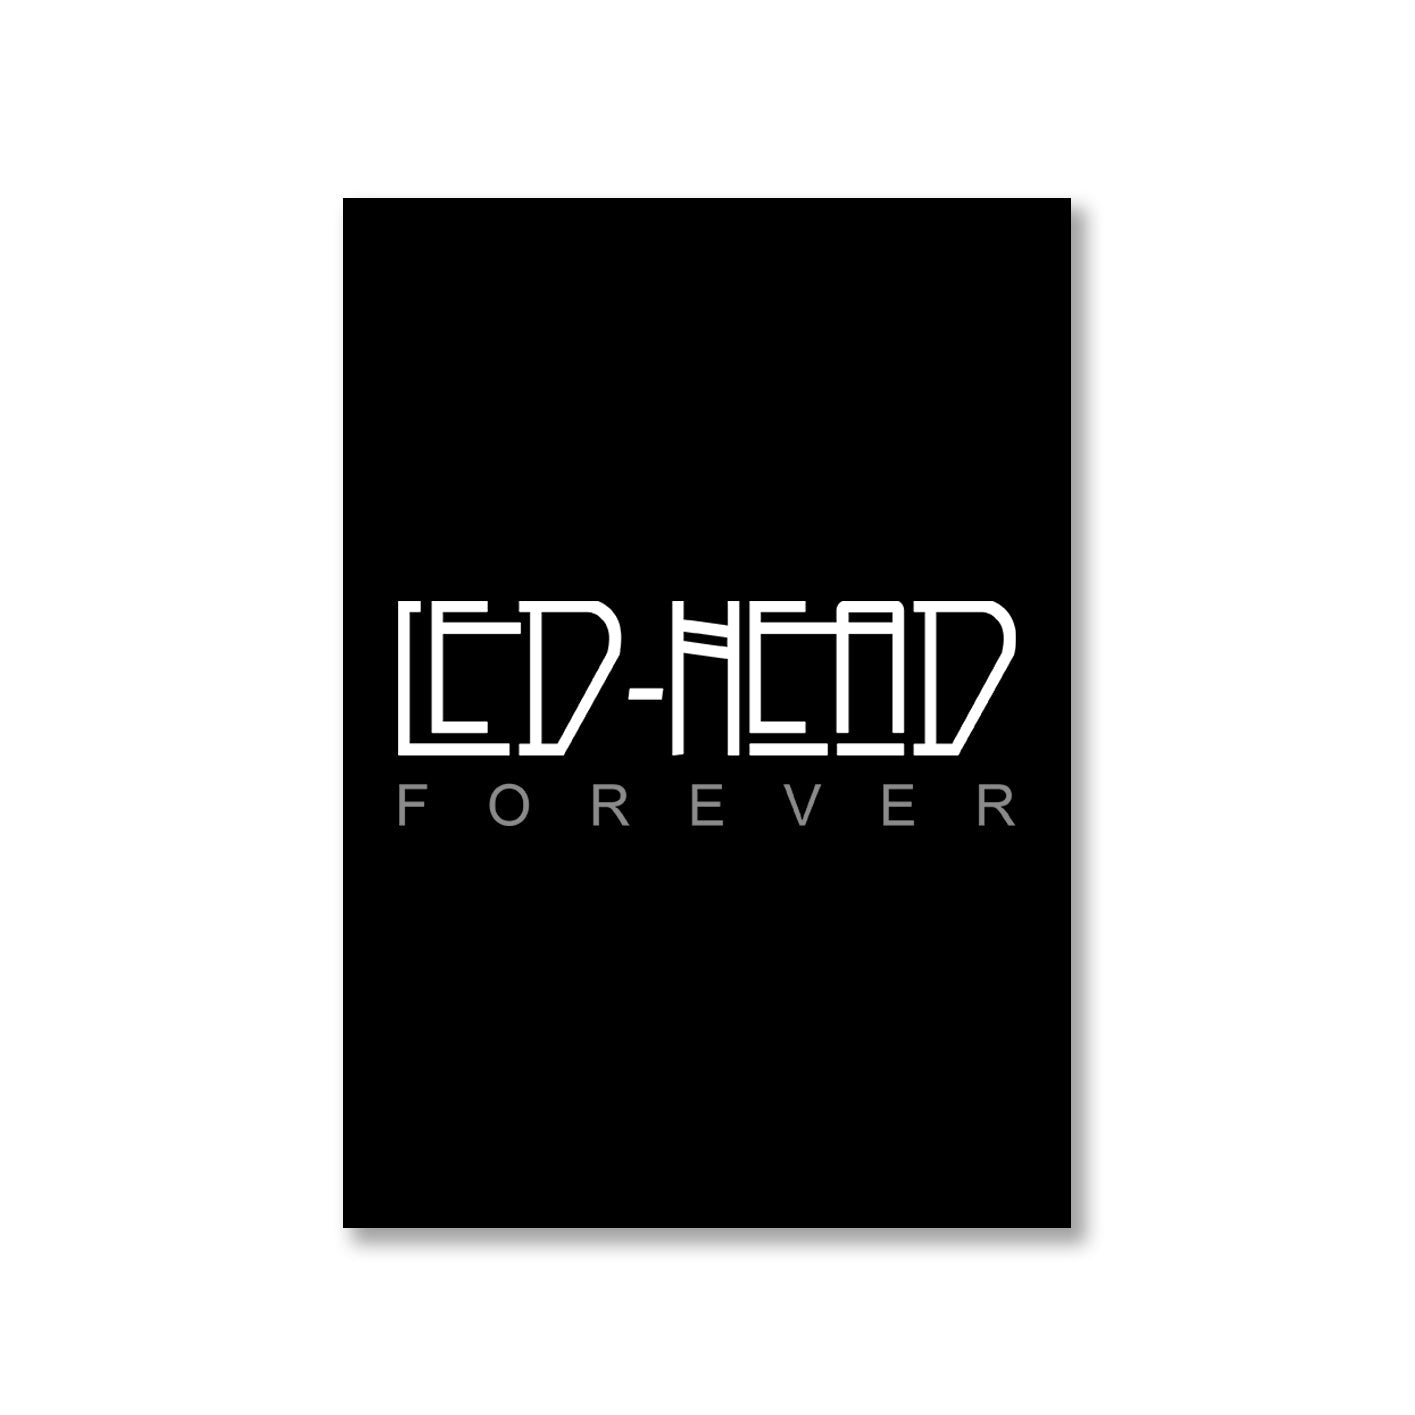 led zeppelin led head forever poster wall art buy online united states of america usa the banyan tee tbt a4 